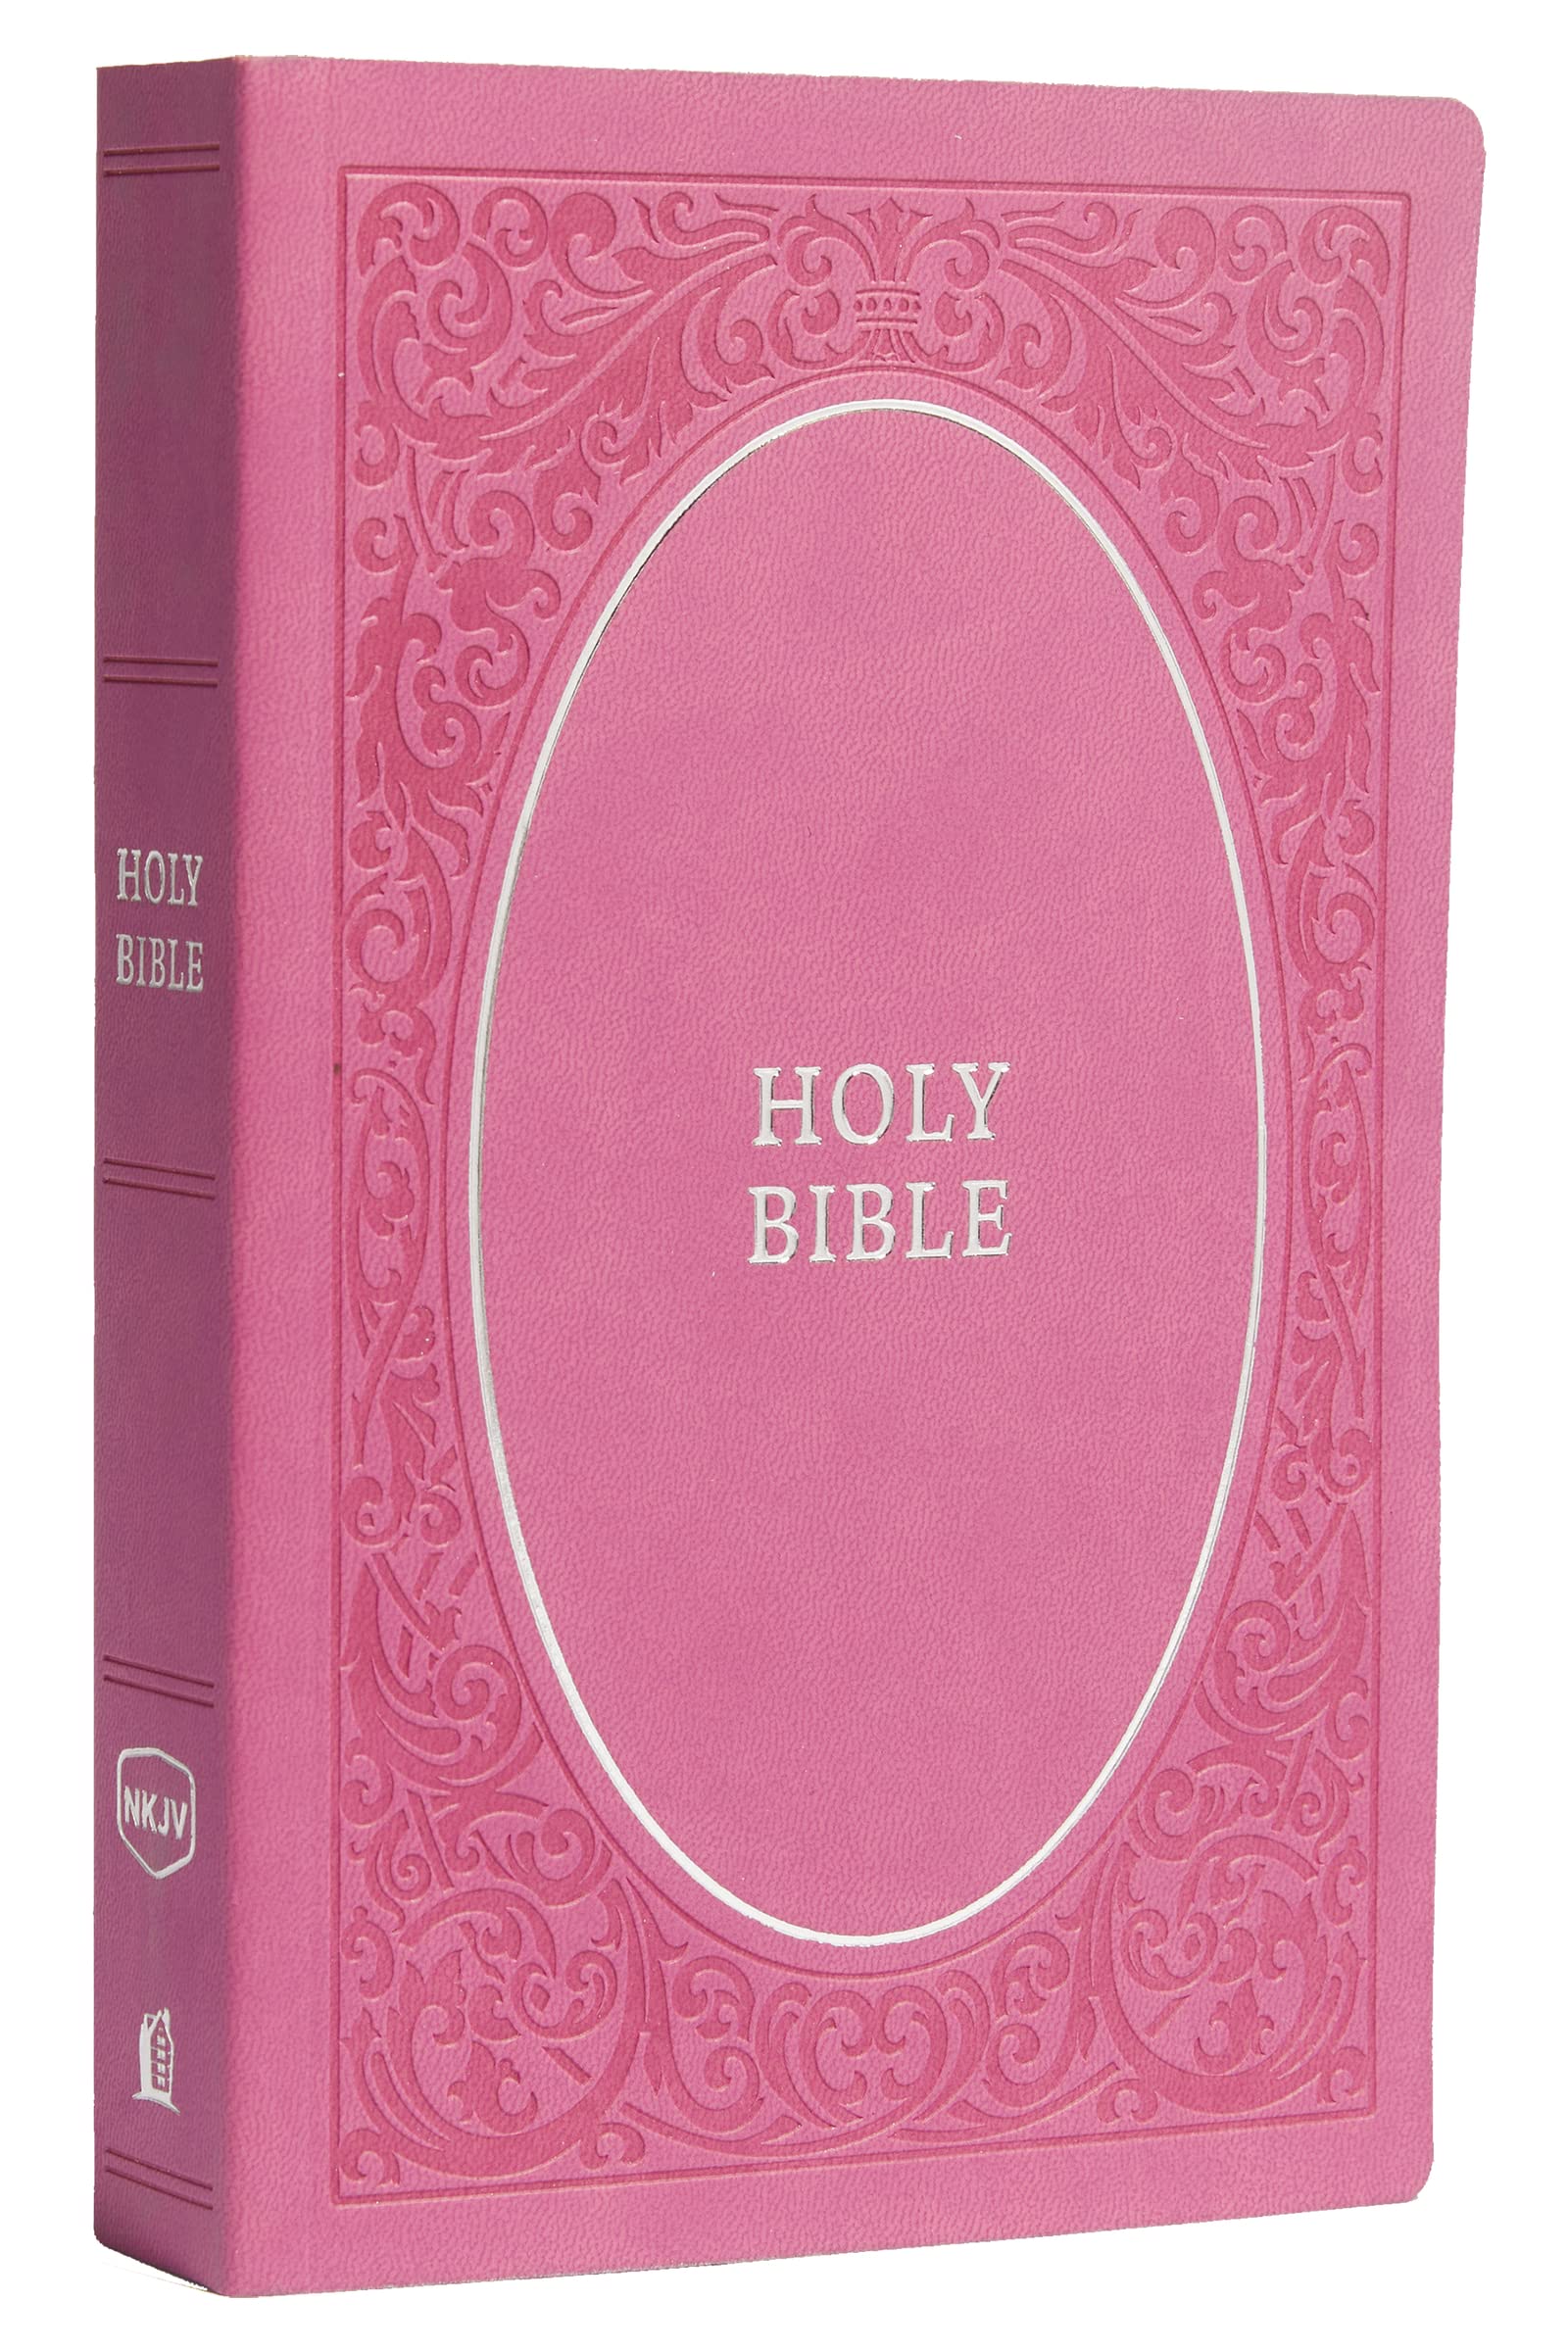 NKJV, Holy Bible, Soft Touch Edition, Imitation Leather, Pink, Comfort Print by Thomas Nelson